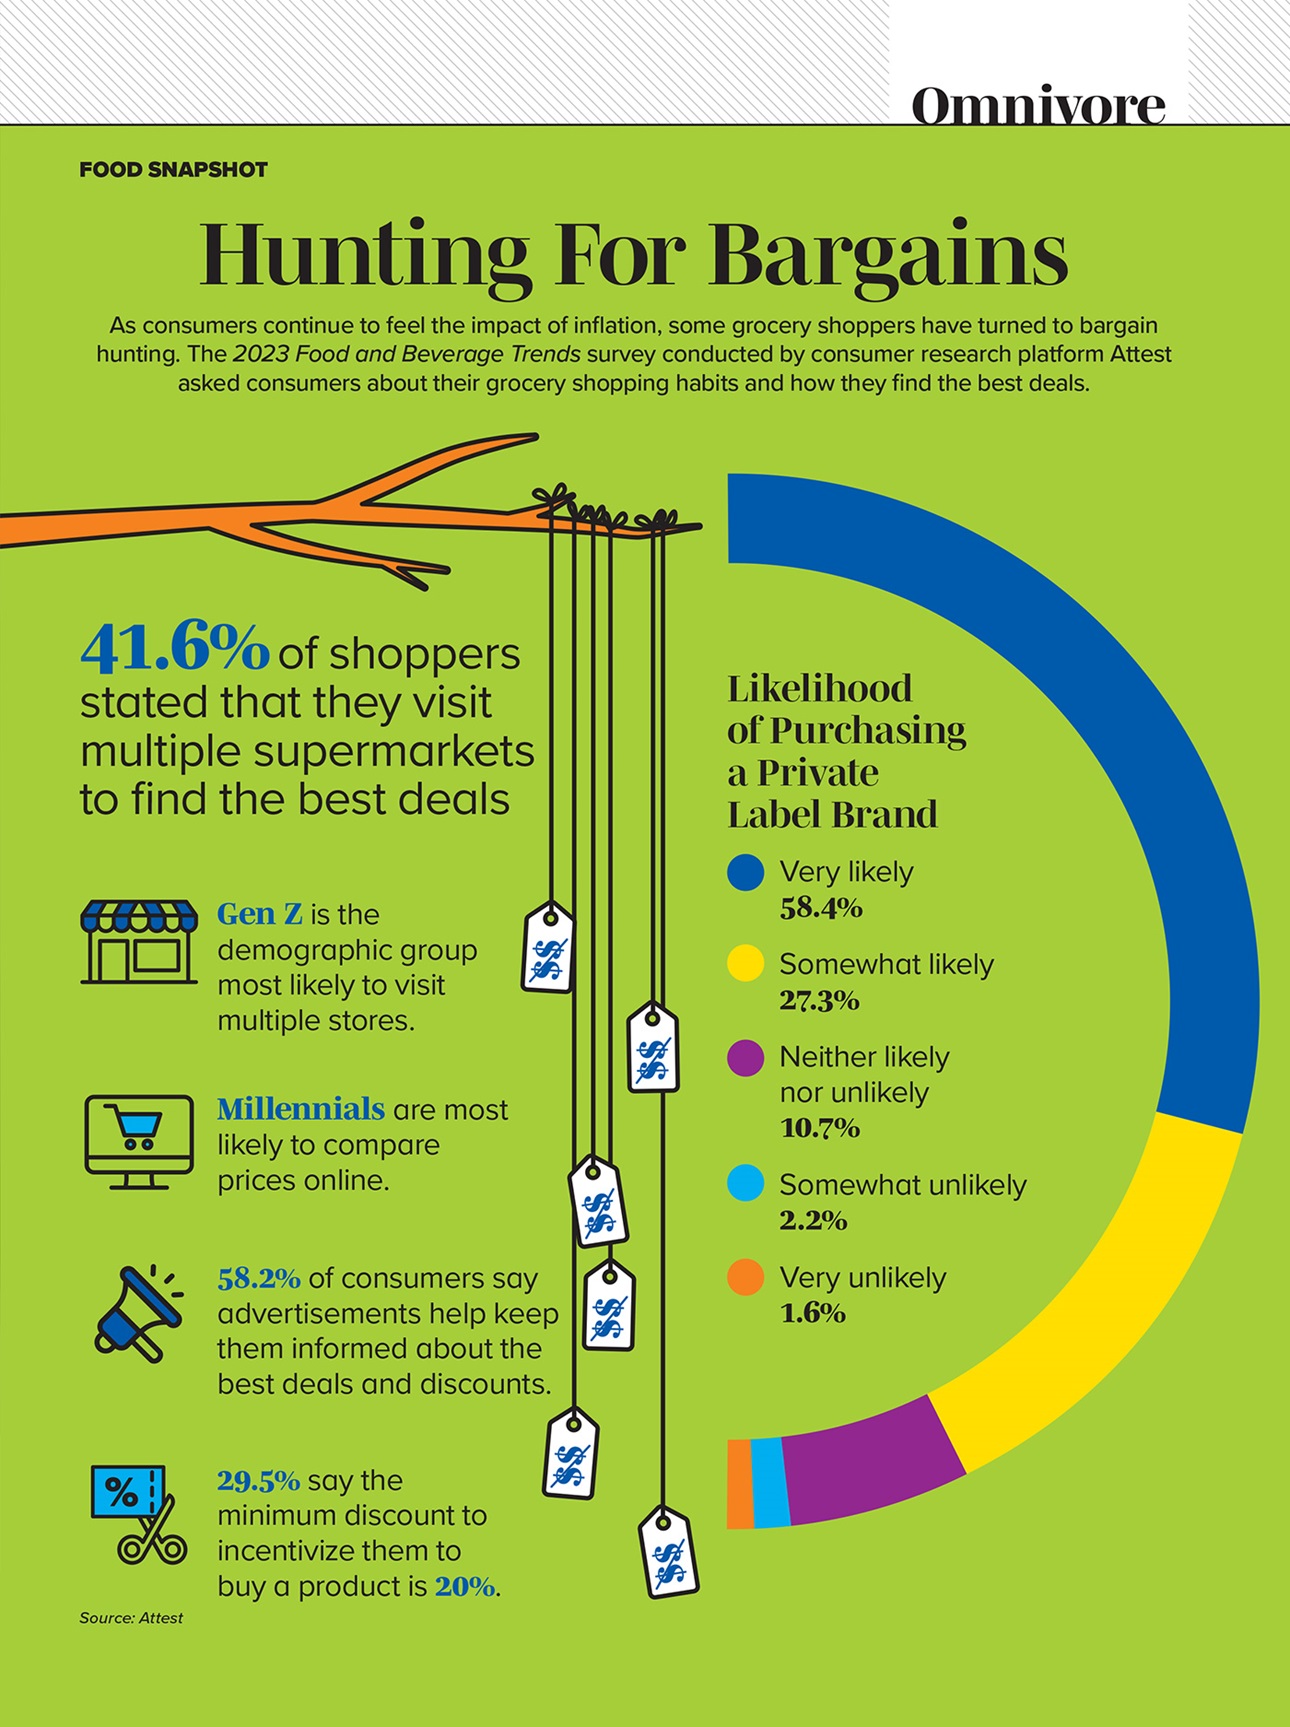 Hunting For Bargains infographic